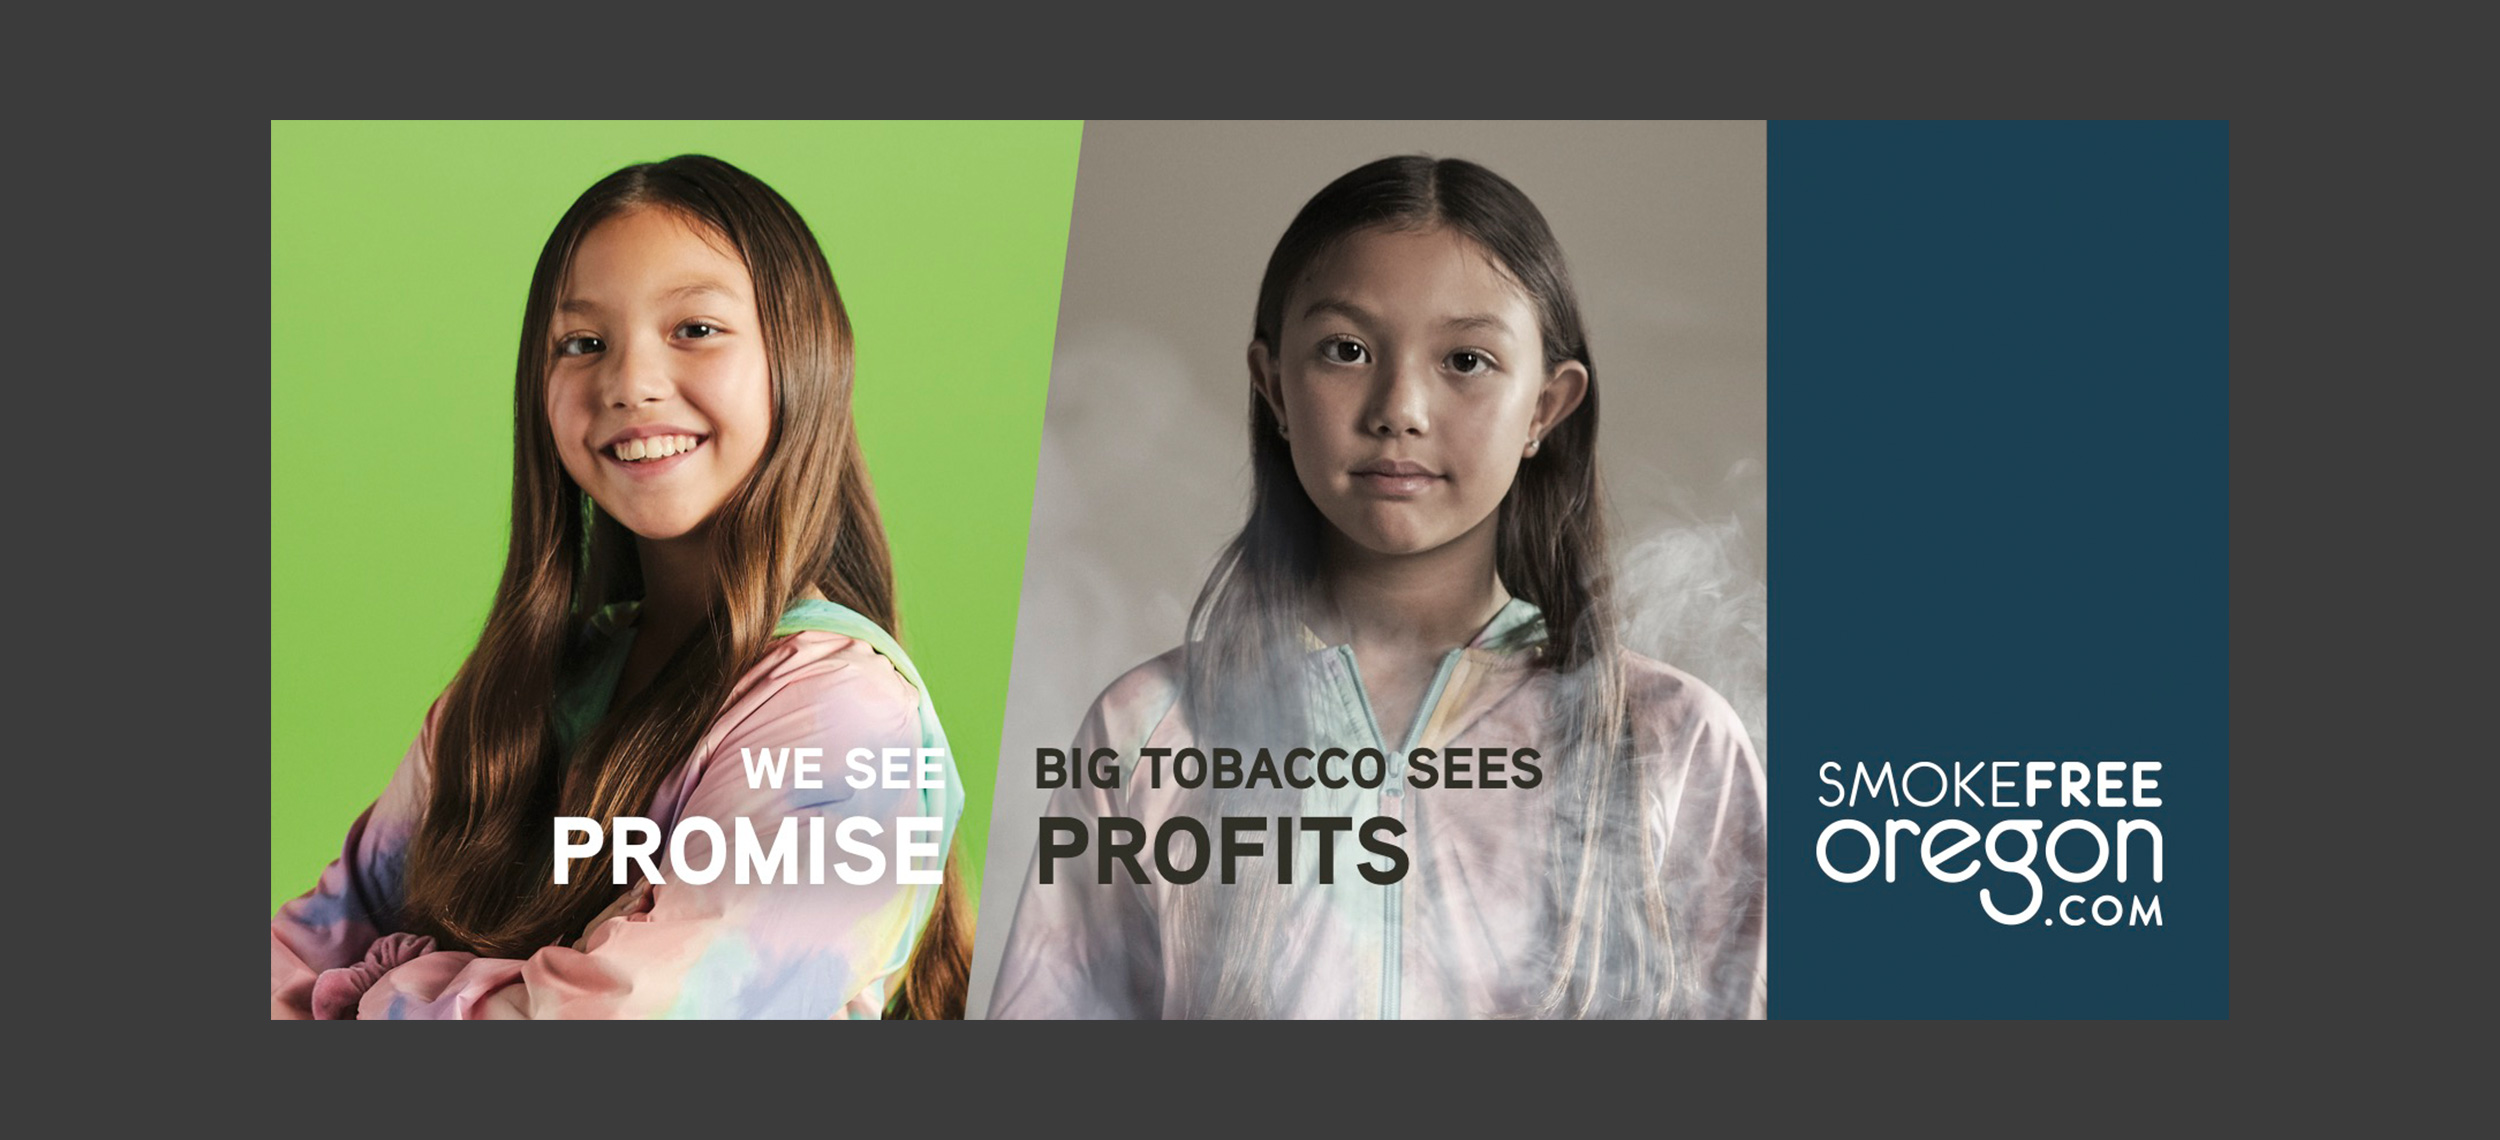 We see promise. Big tobacco sees profits